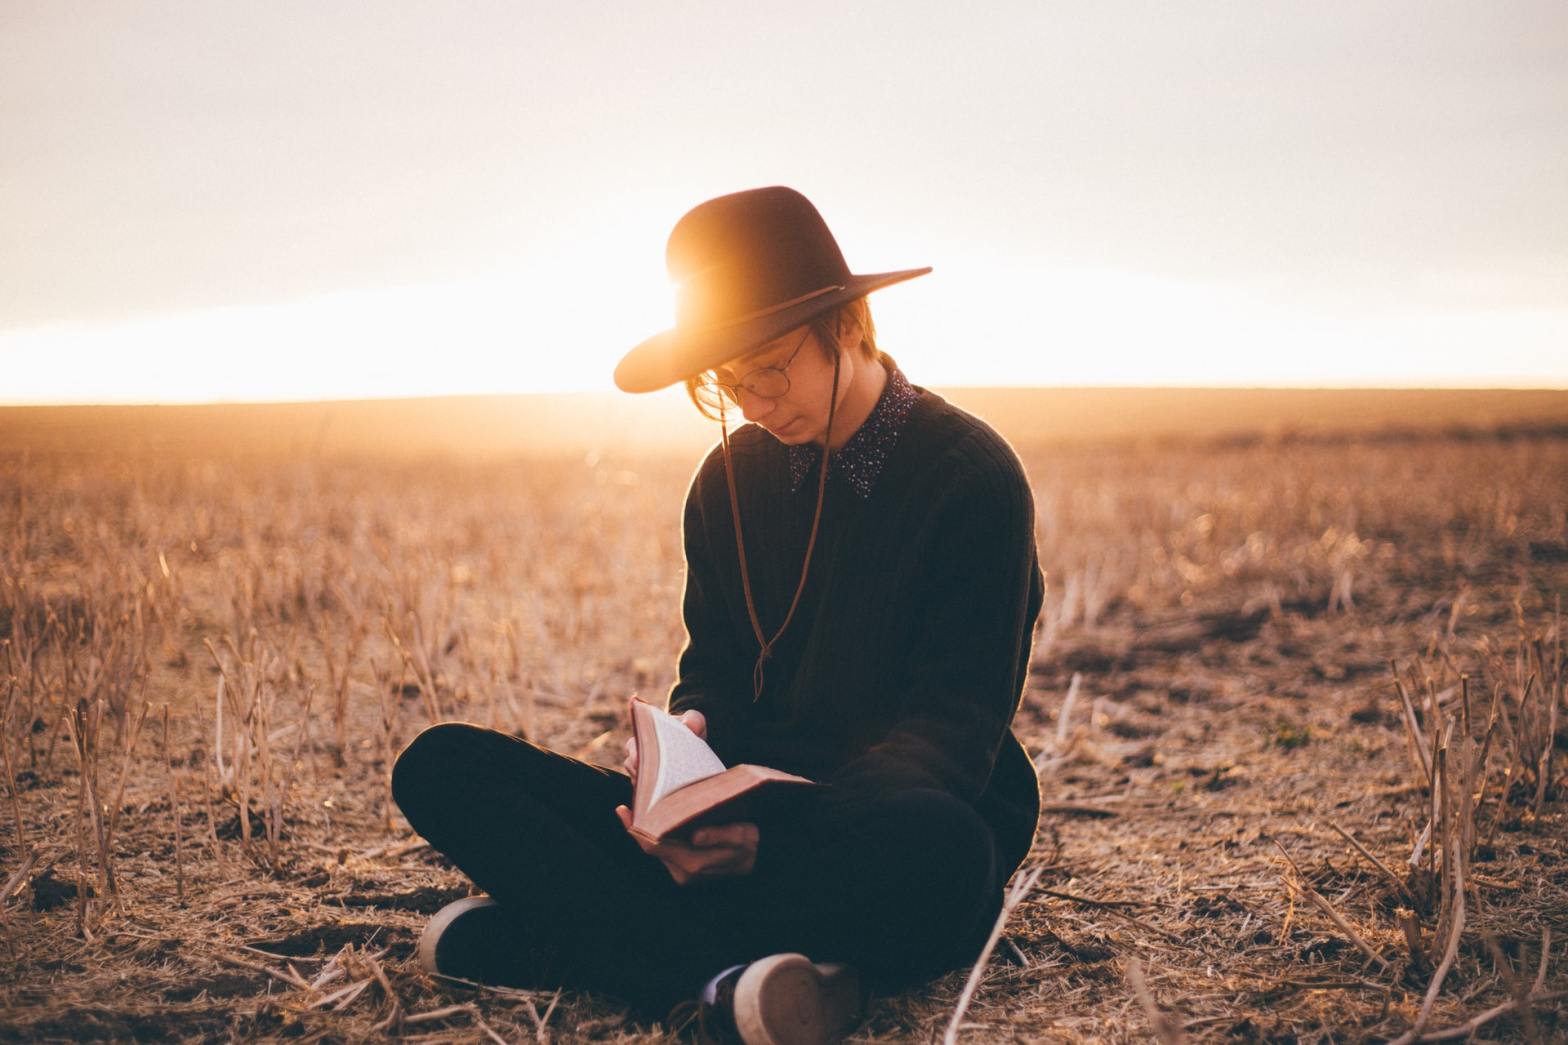 A guy reading in the middle of the field